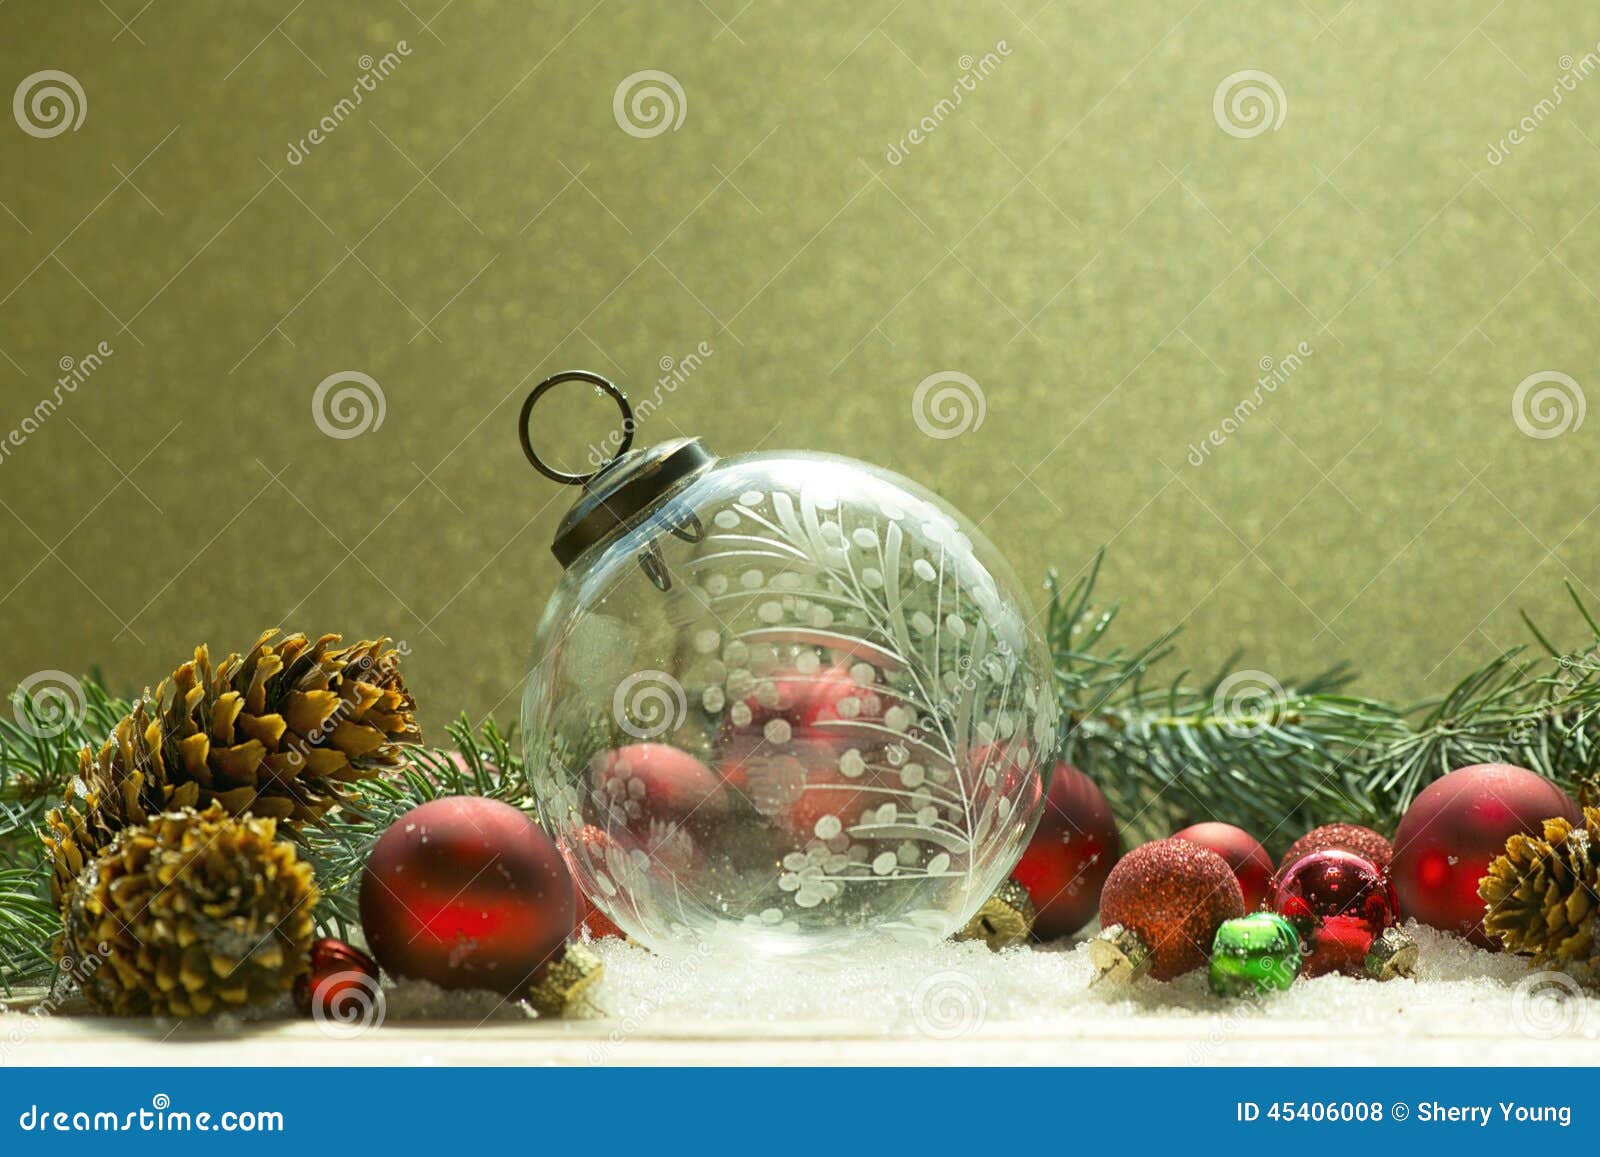 Antique Christmas Ornament stock photo. Image of ball - 45406008